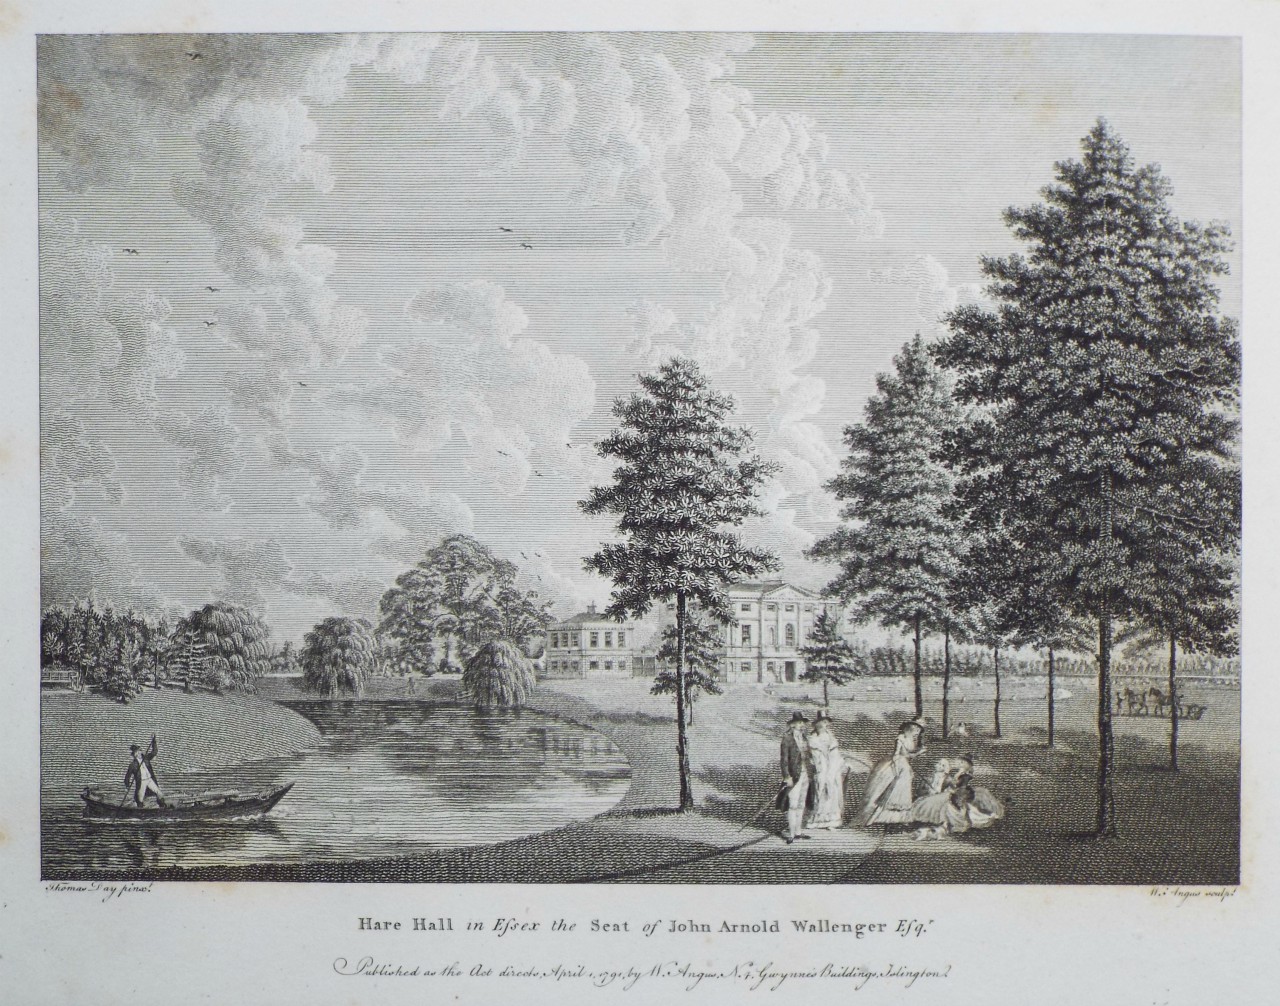 Print - Hare Hall in Essex the Seat of John Arnold Wellenger Esqr. - Angus